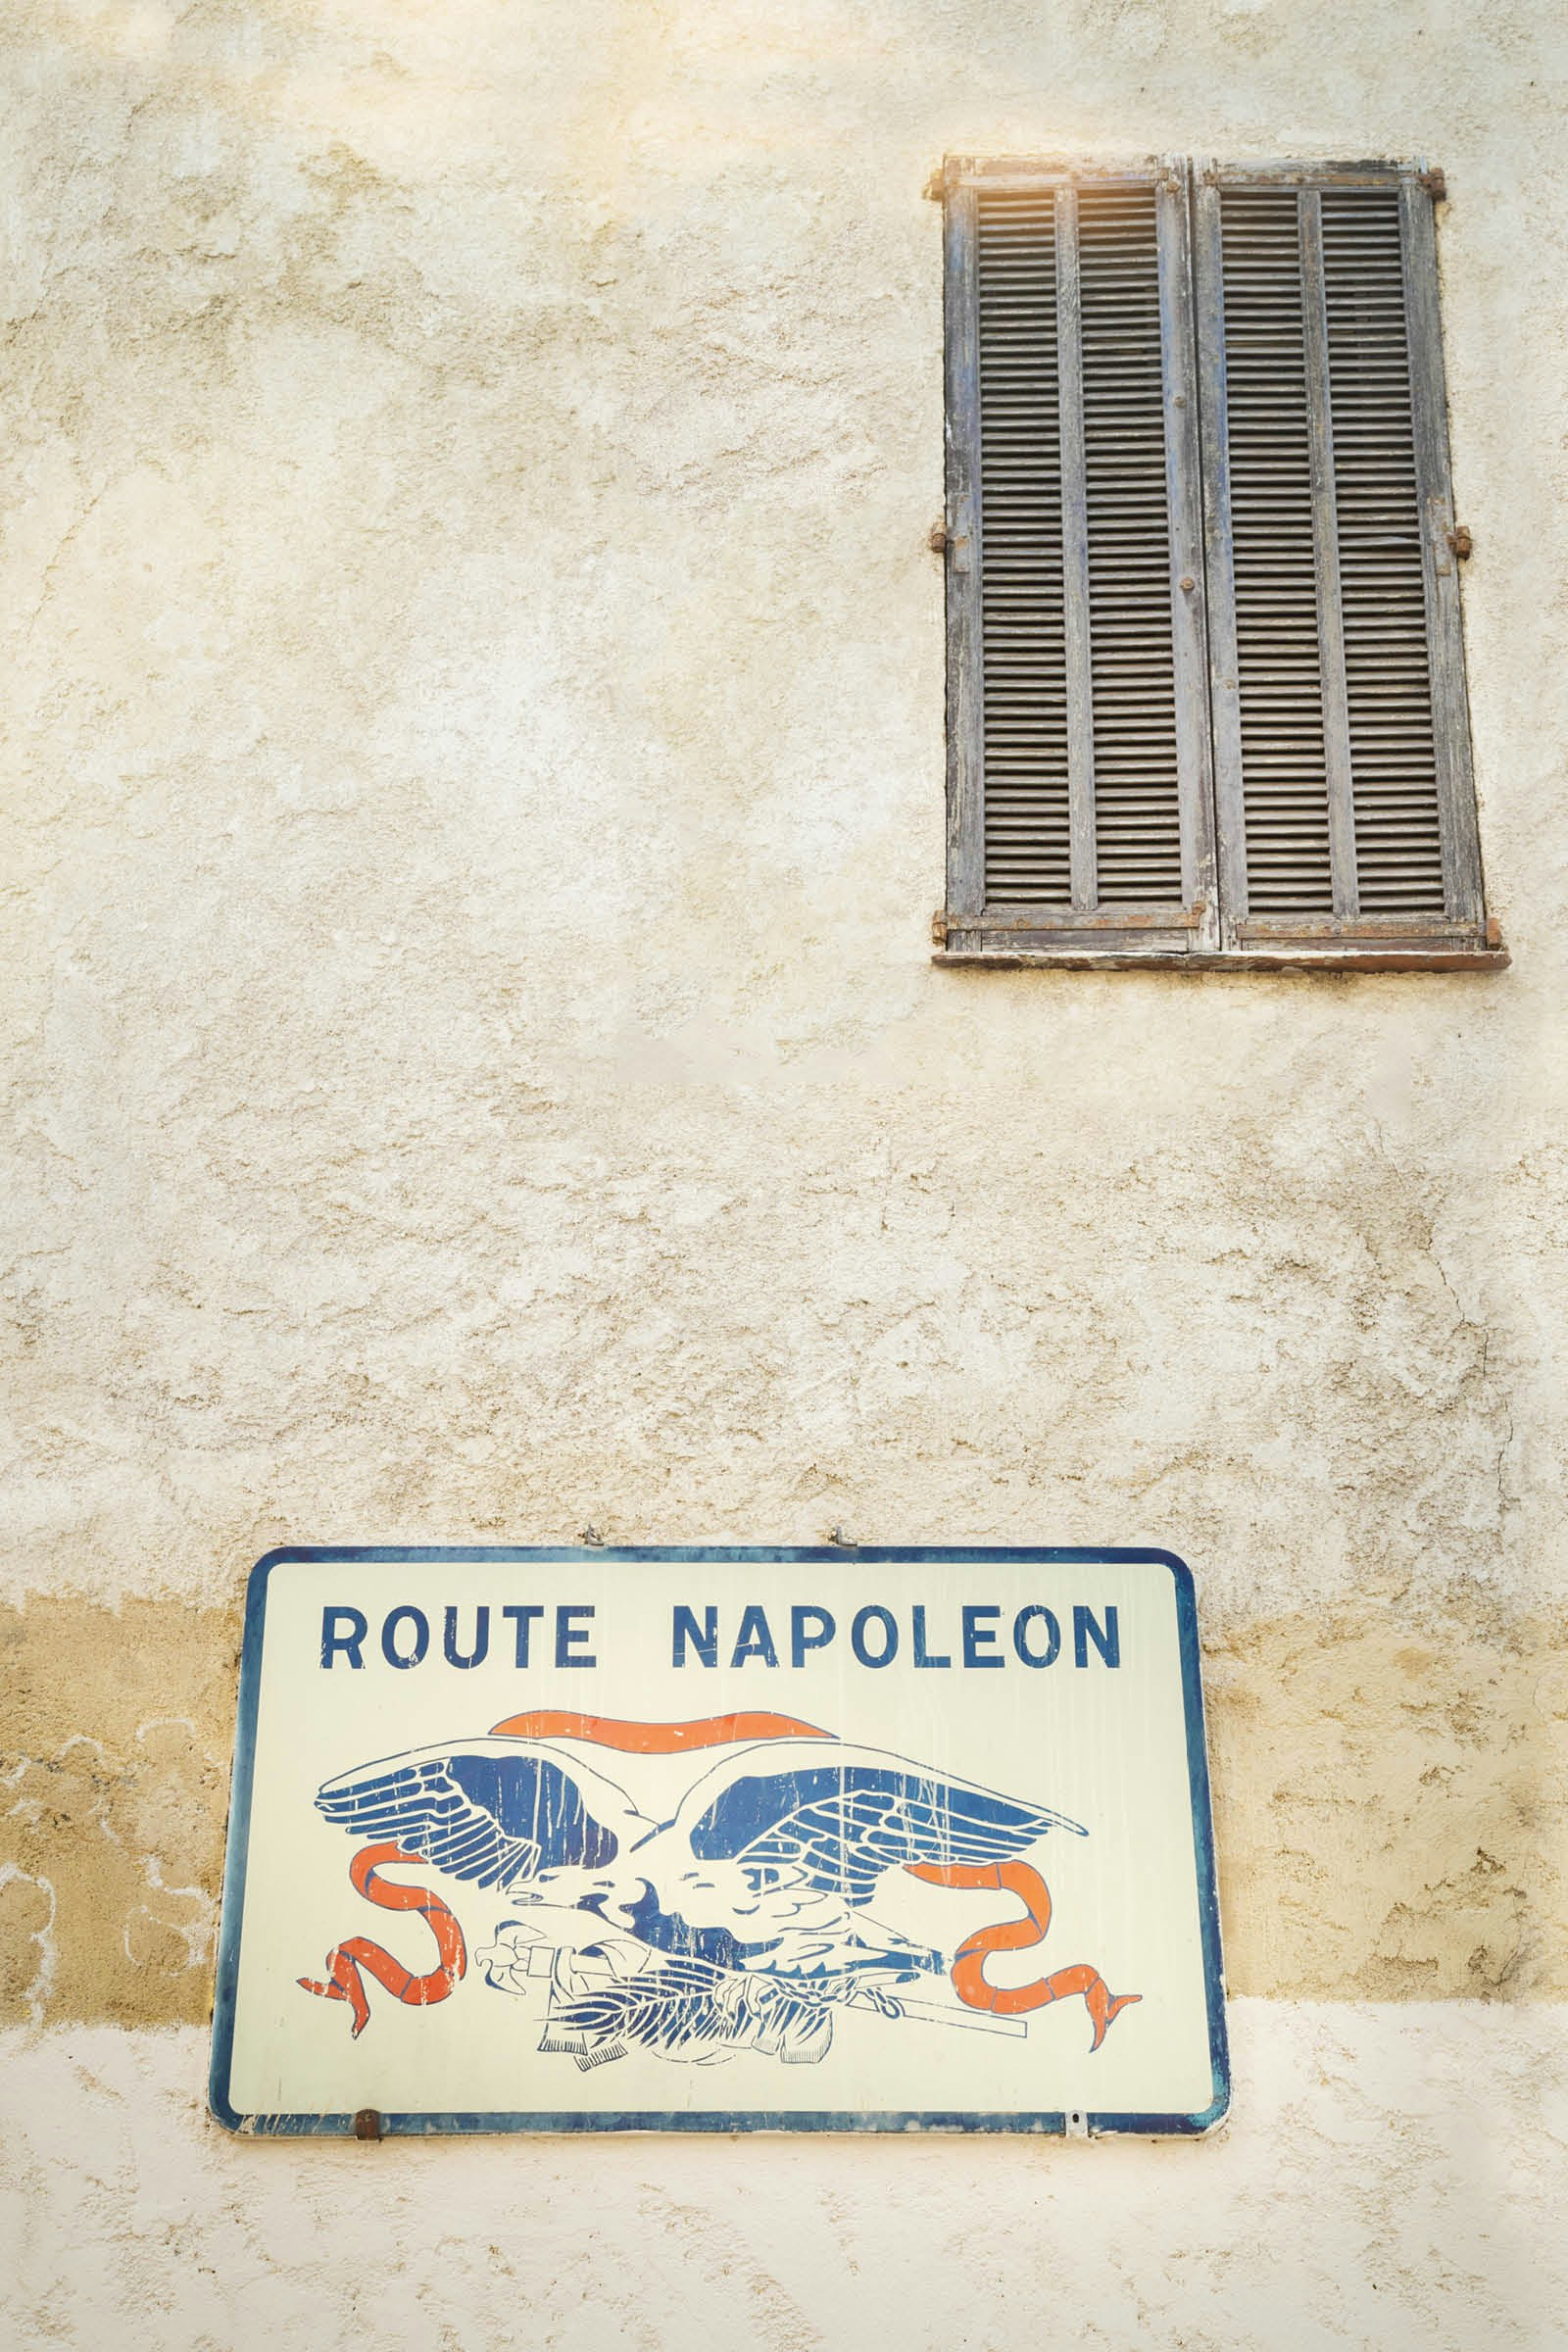 An eagle marks a road sign at the start of the Route Napoléon